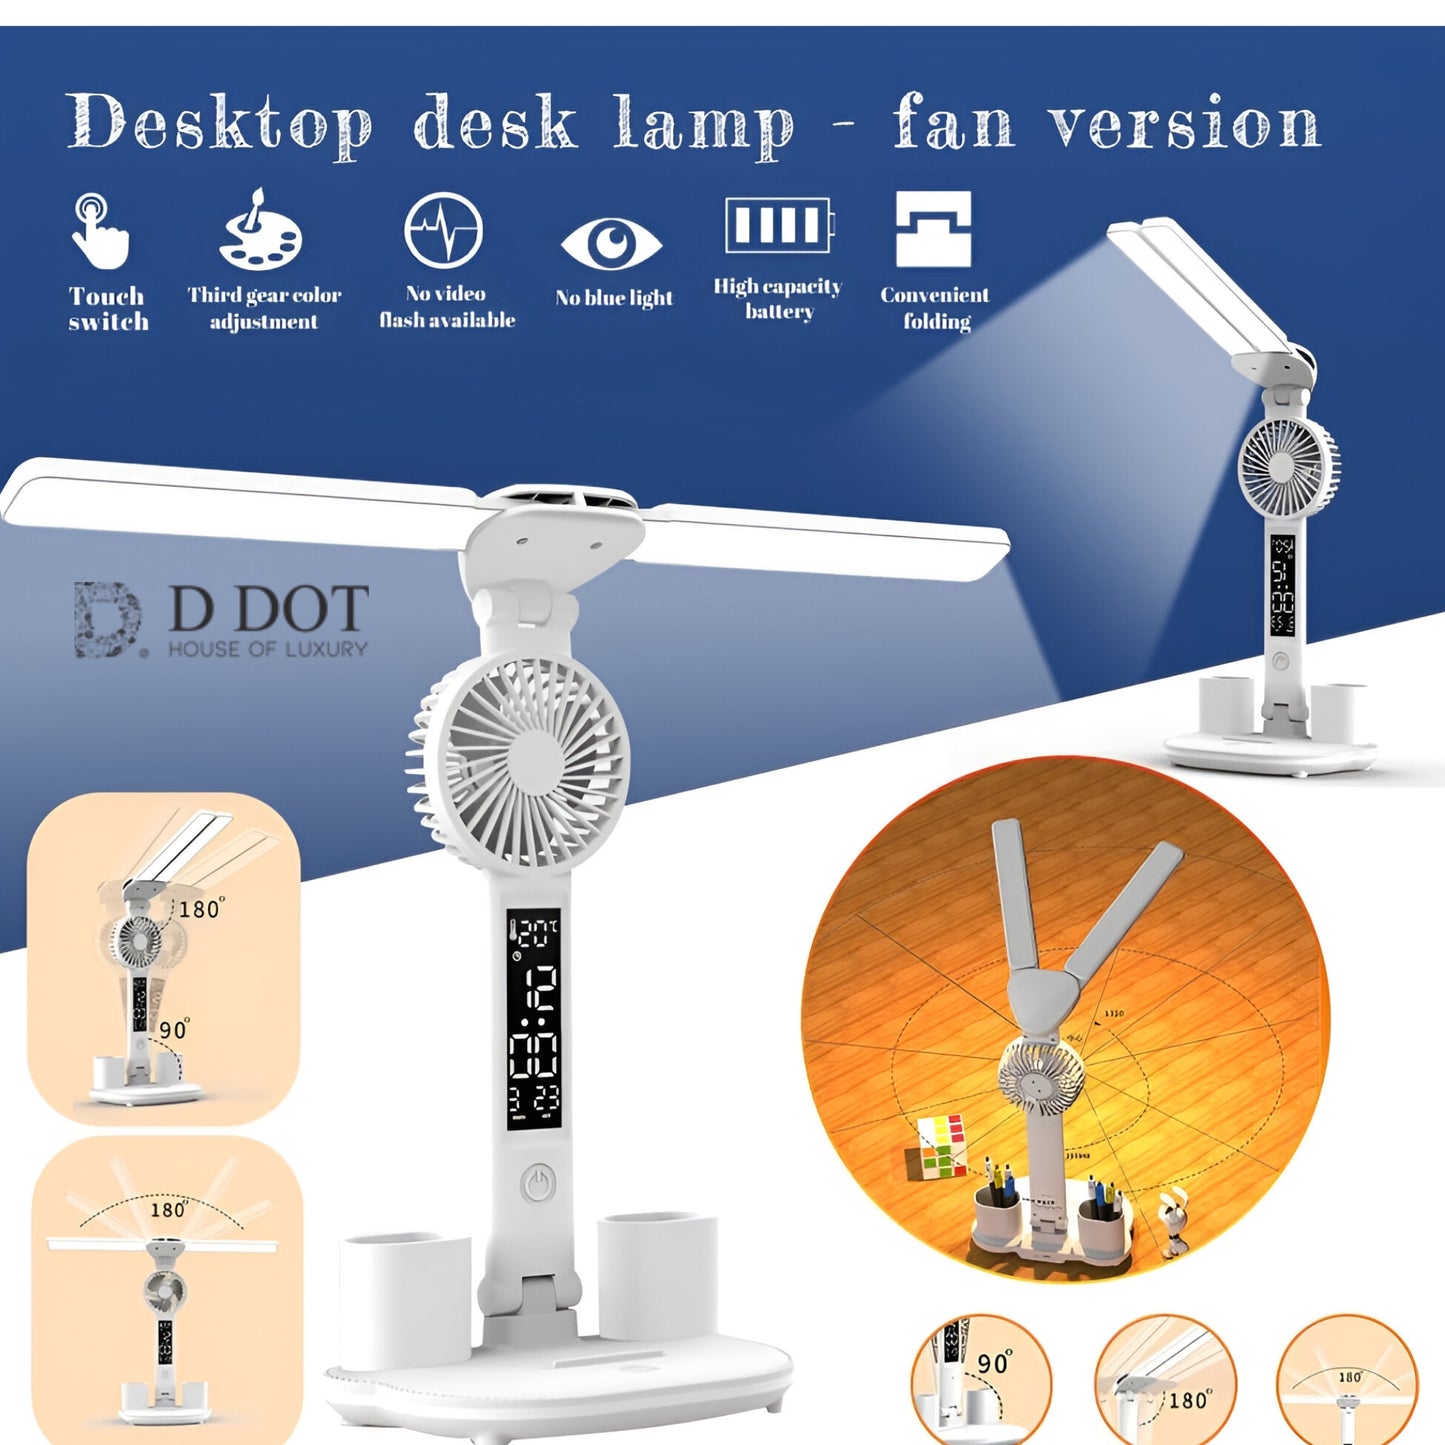 "Double Head Foldable LED Desk Lamp with Smart LED Display - Adjustable and Modern"